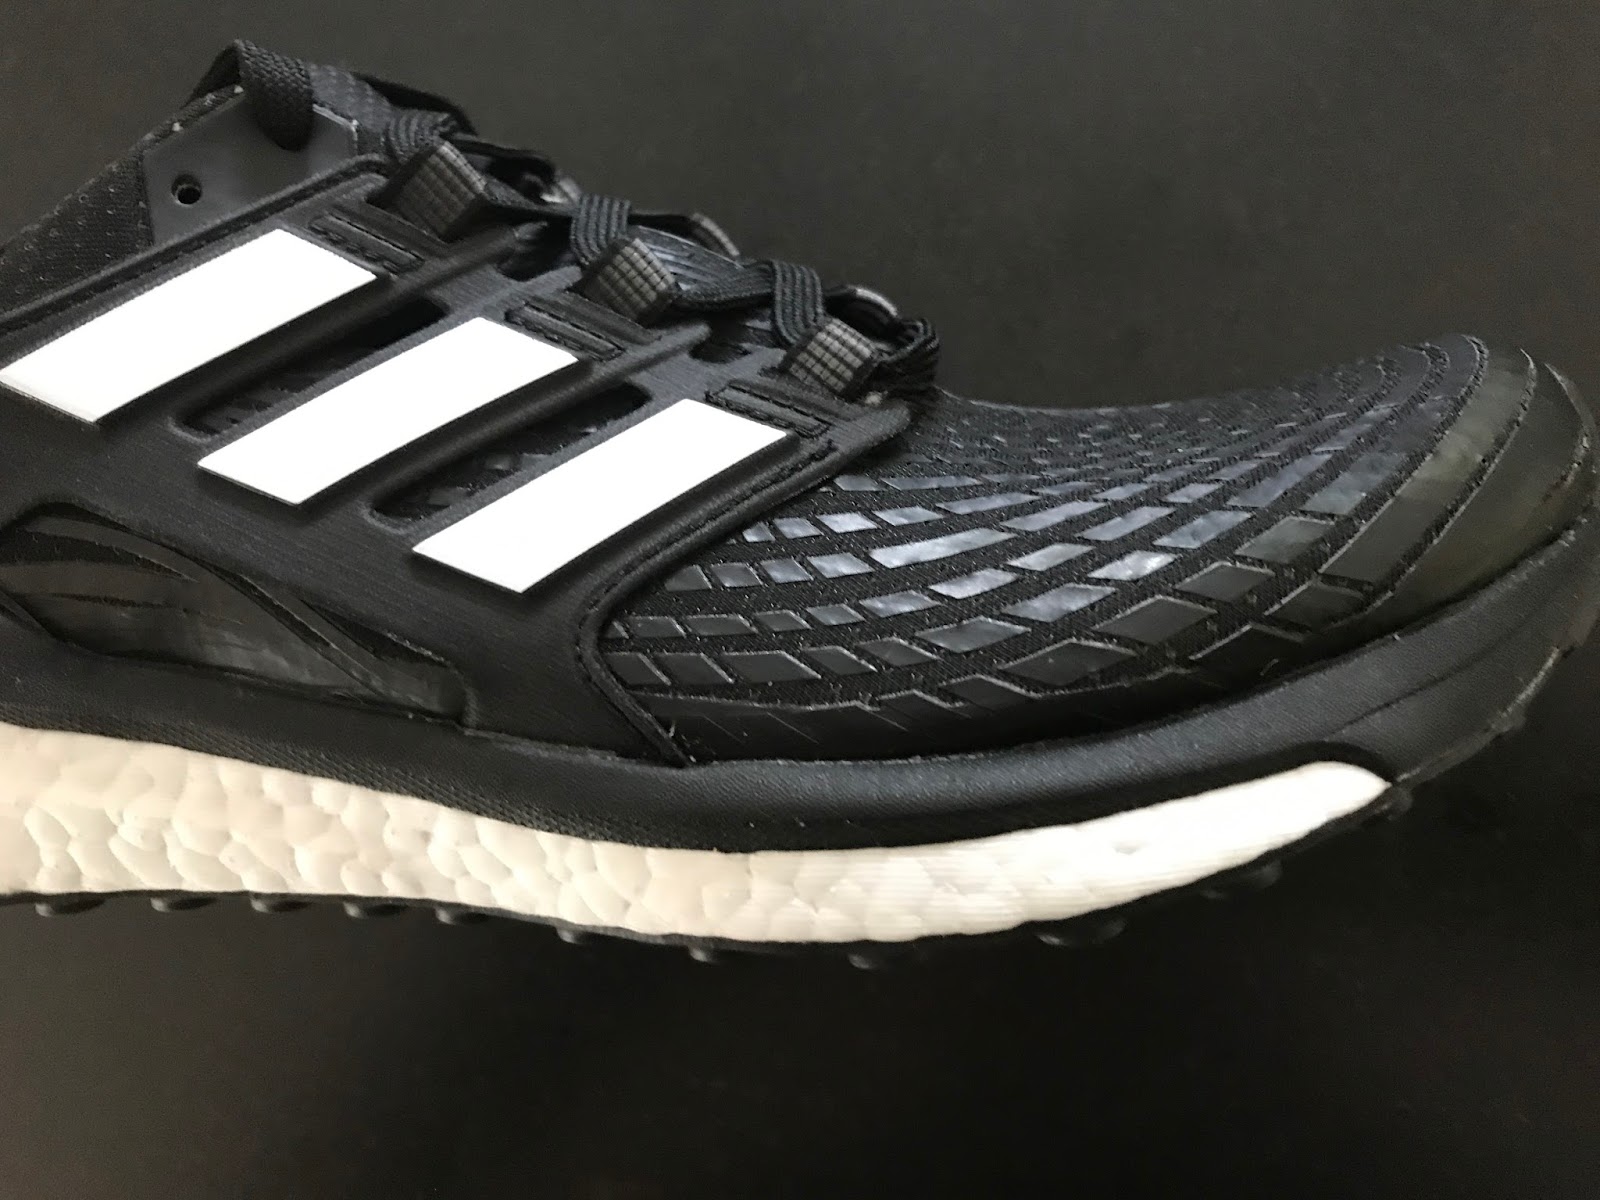 Road Trail Run: 2017 adidas Energy Boost (4): Luxury German SUV. Looks and Stats Deceiving!